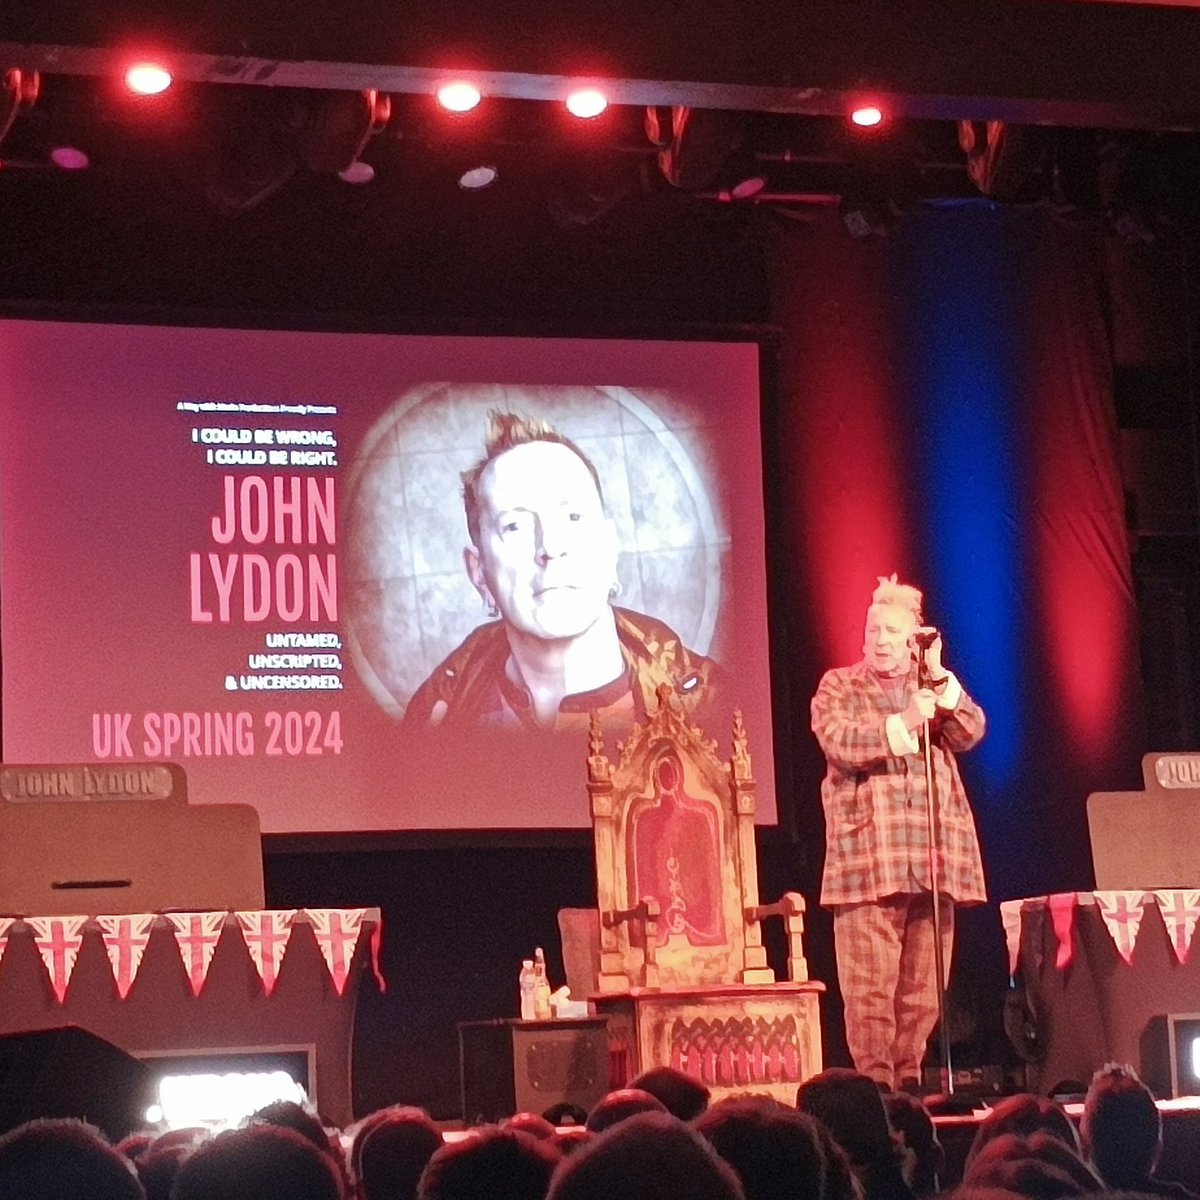 I was in the presence of greatness over the weekend! John Lydon @lydonofficial at @TheHarlington in Fleet, all round great human being and working class hero. I recommend catching his UK tour!